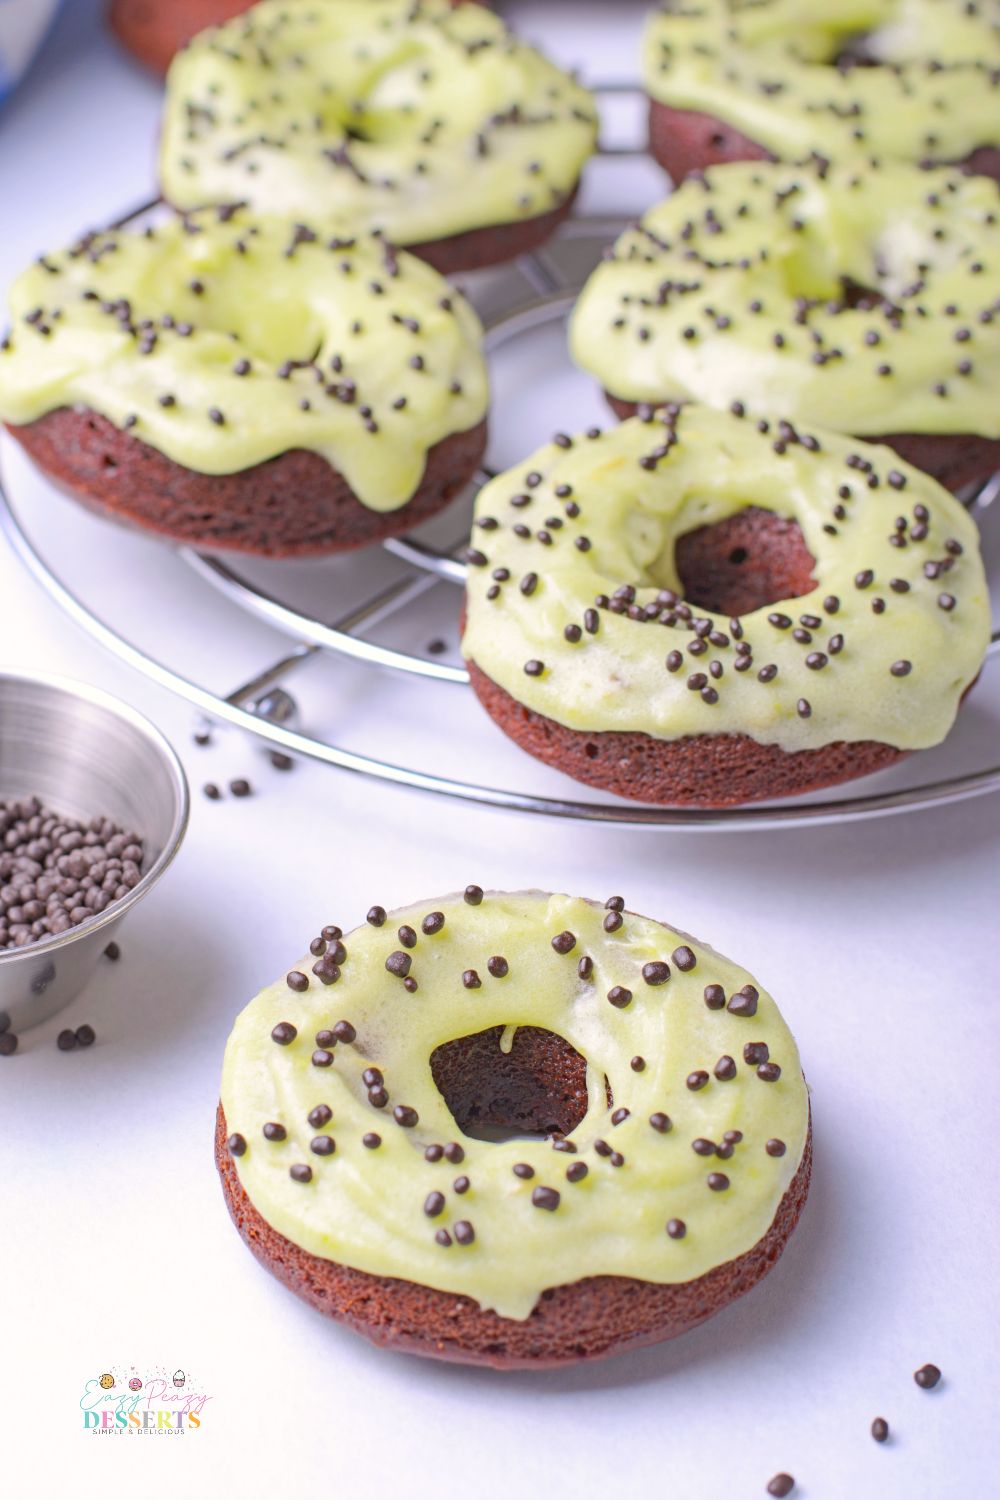 Image of avocado donuts with chocolate